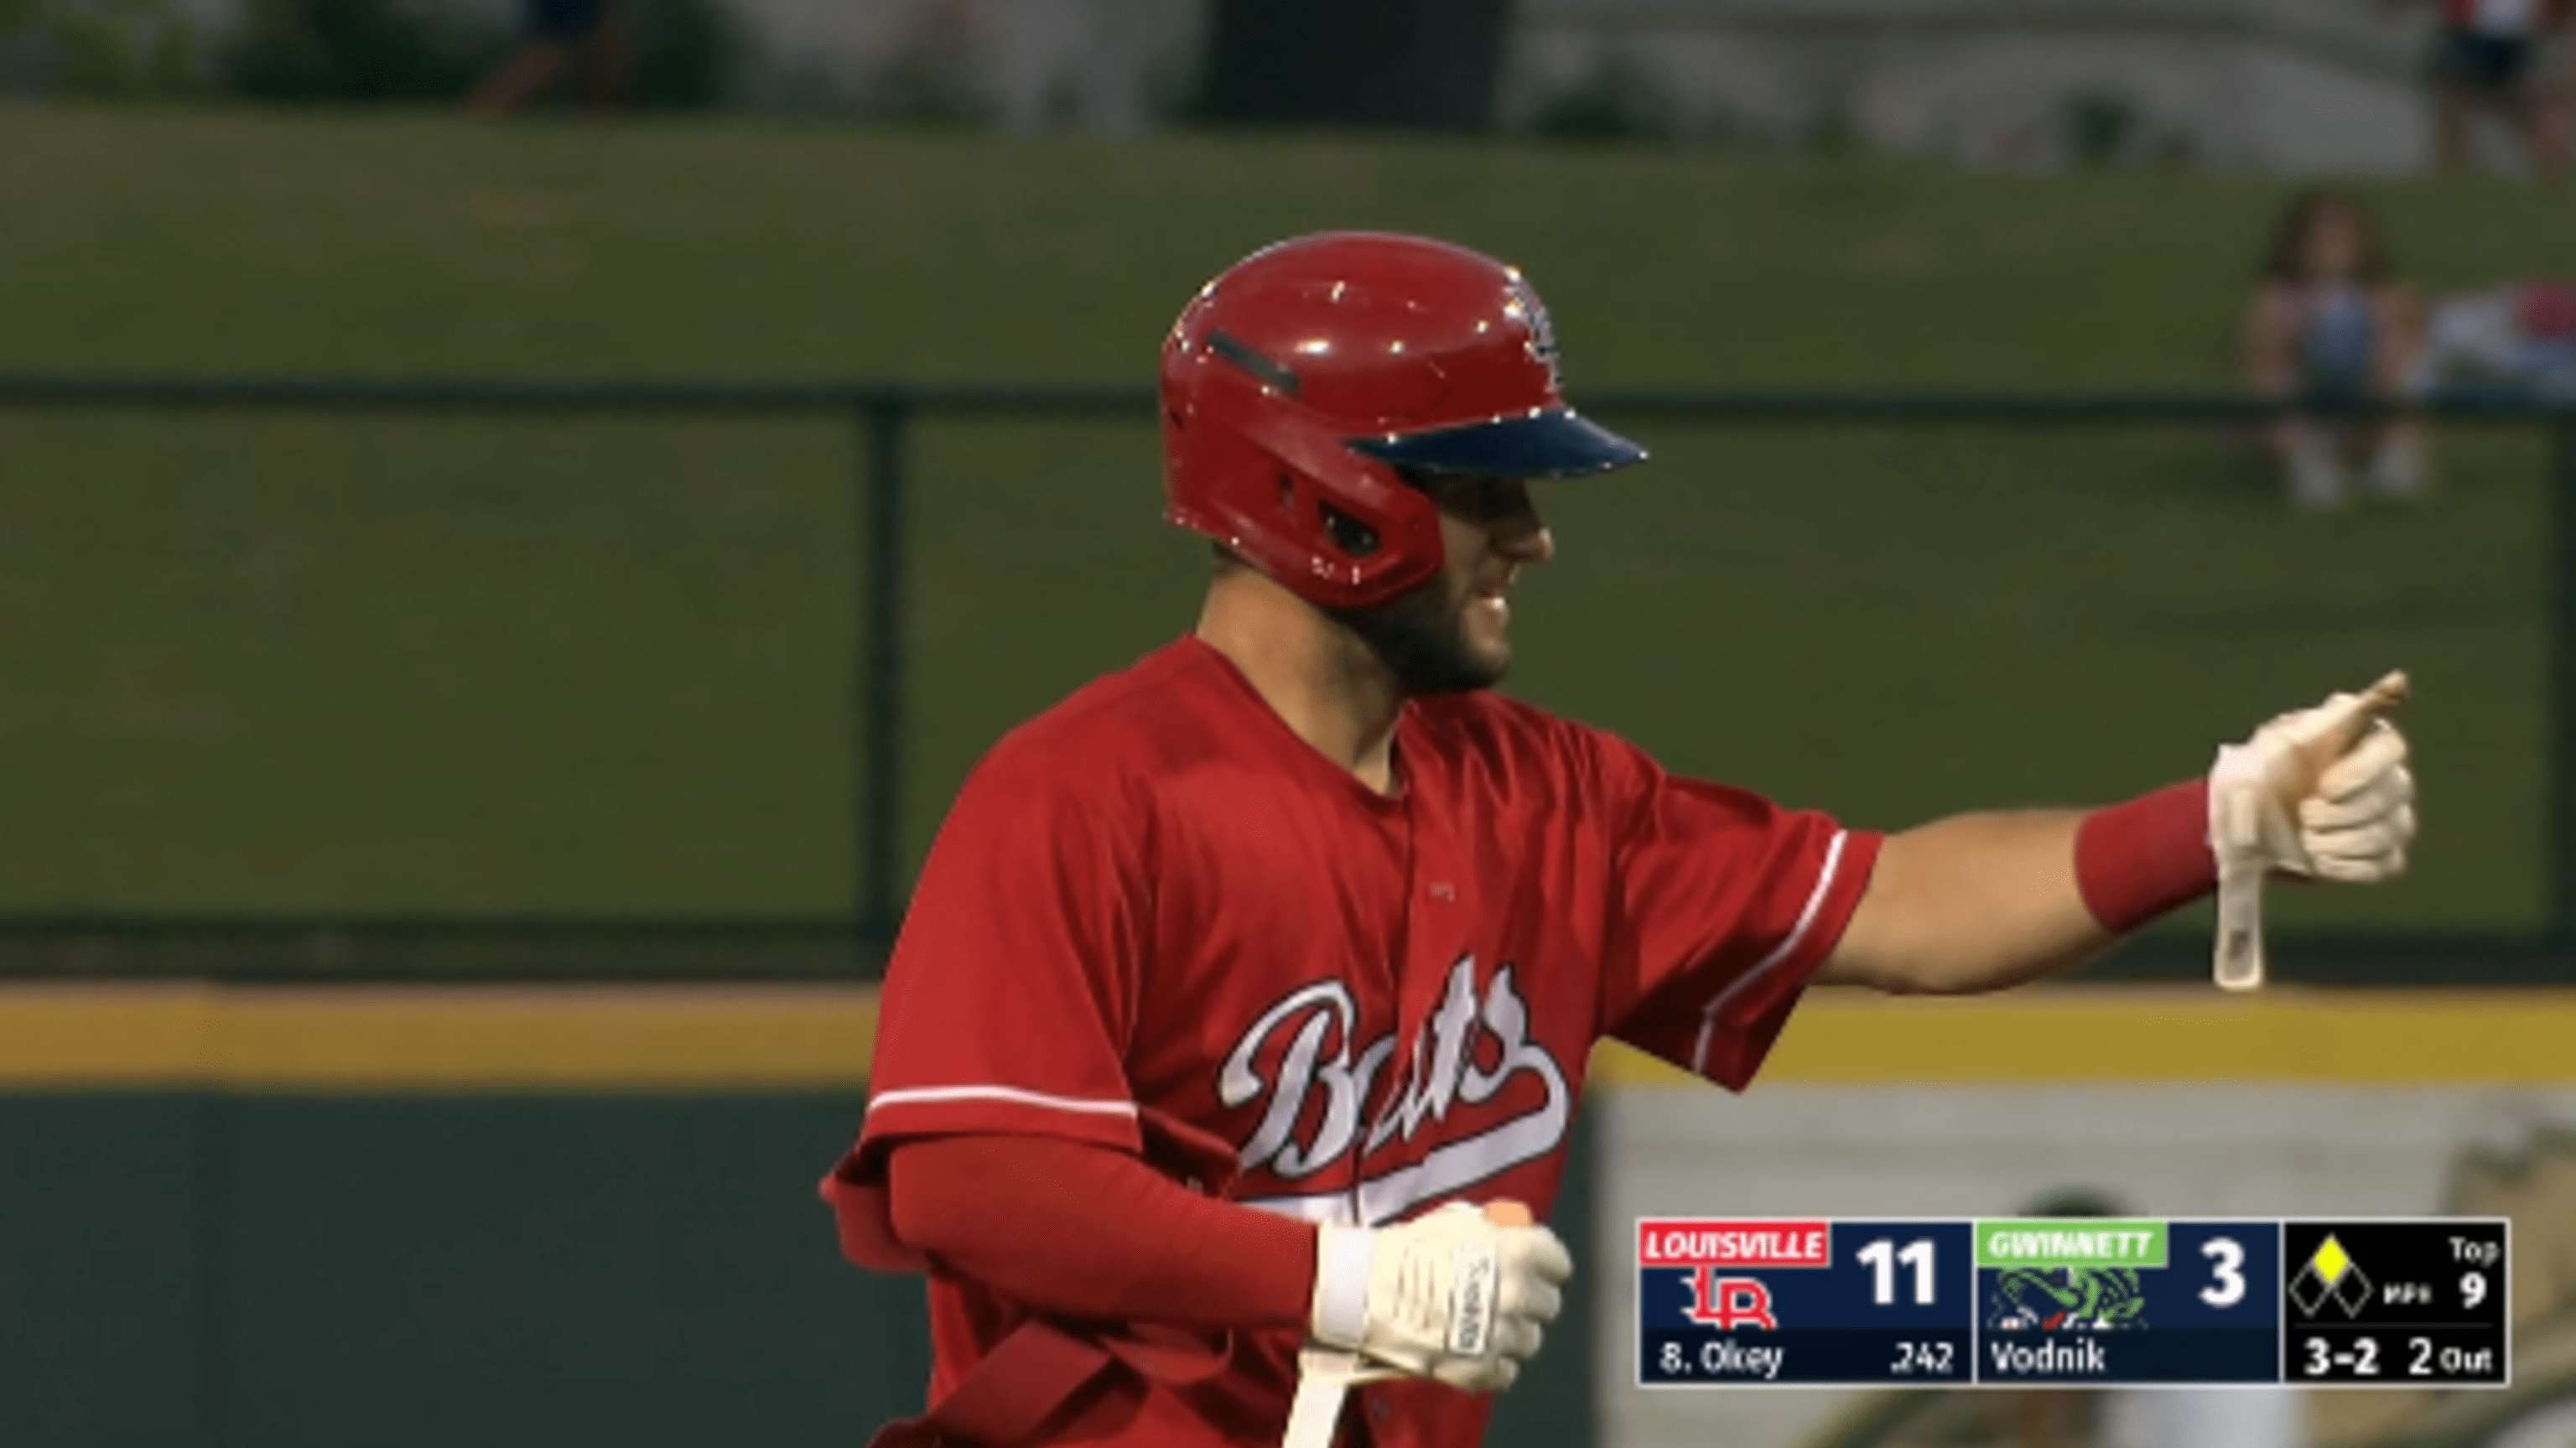 Chris Okey hits for the cycle for Louisville Bats